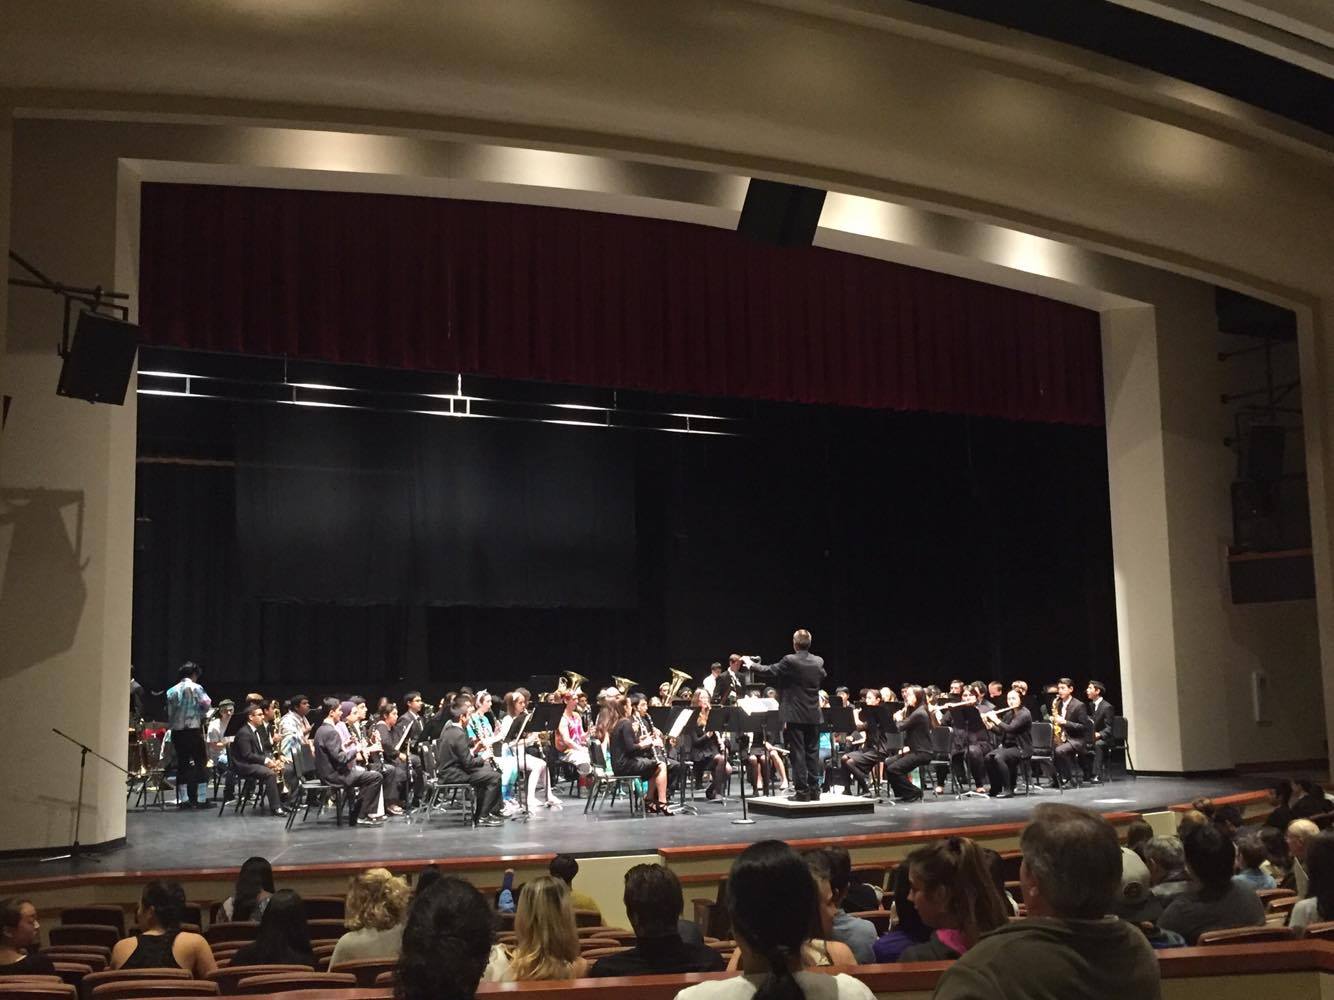 The Paly Symphonic Band, conducted by Jeff Willner, was the first to perform in the new PAC on Thursday May 12. Photo: Emma van der Even.